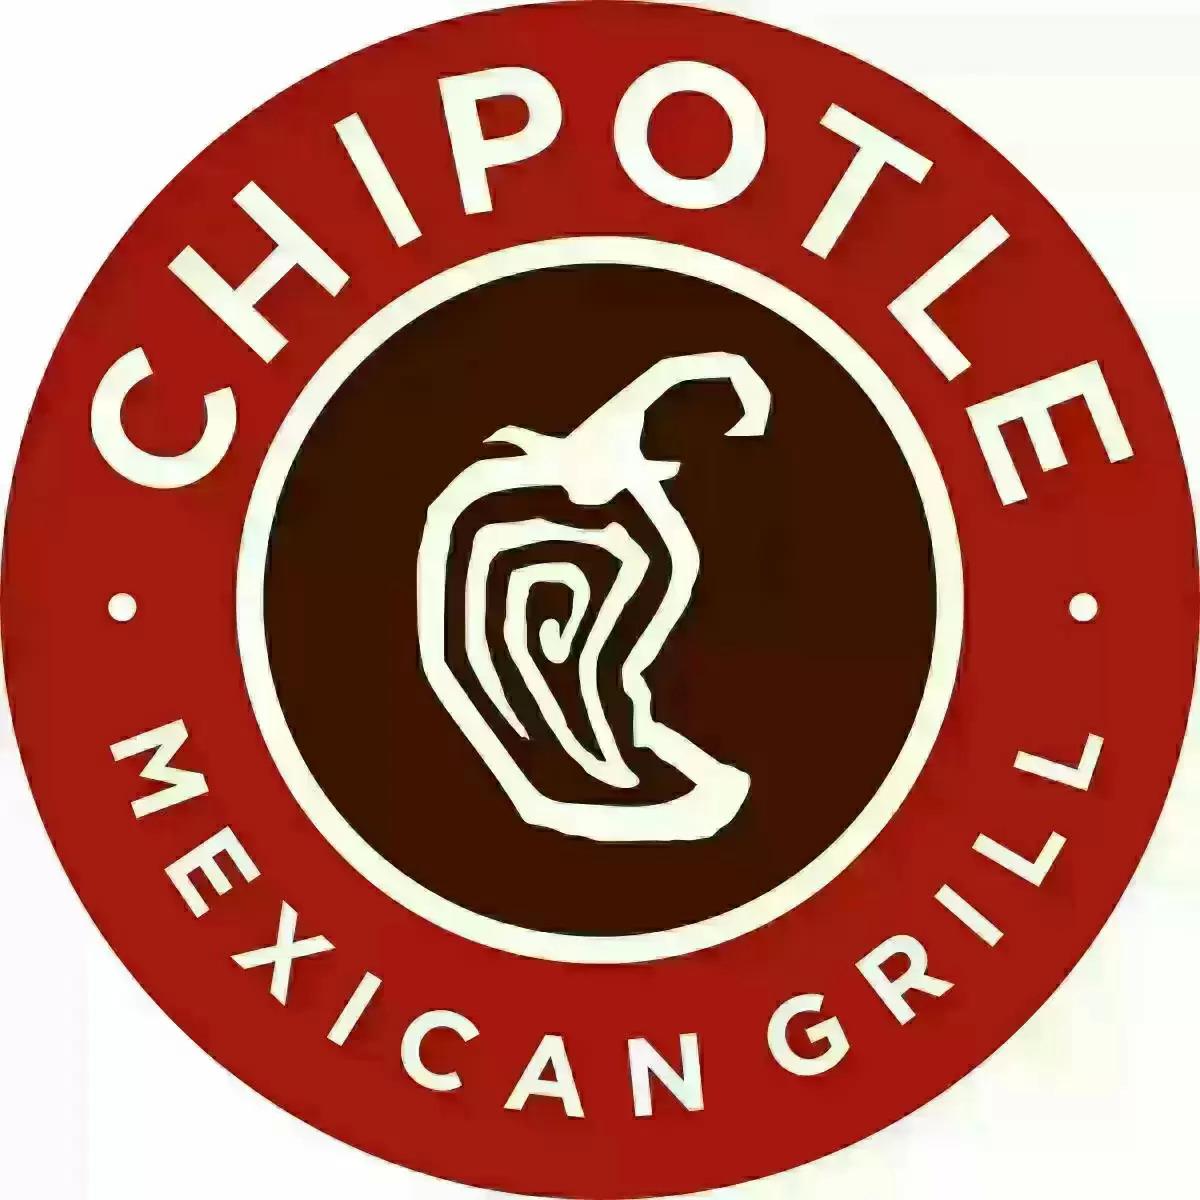 Chipotle Gift Card for 10% Off